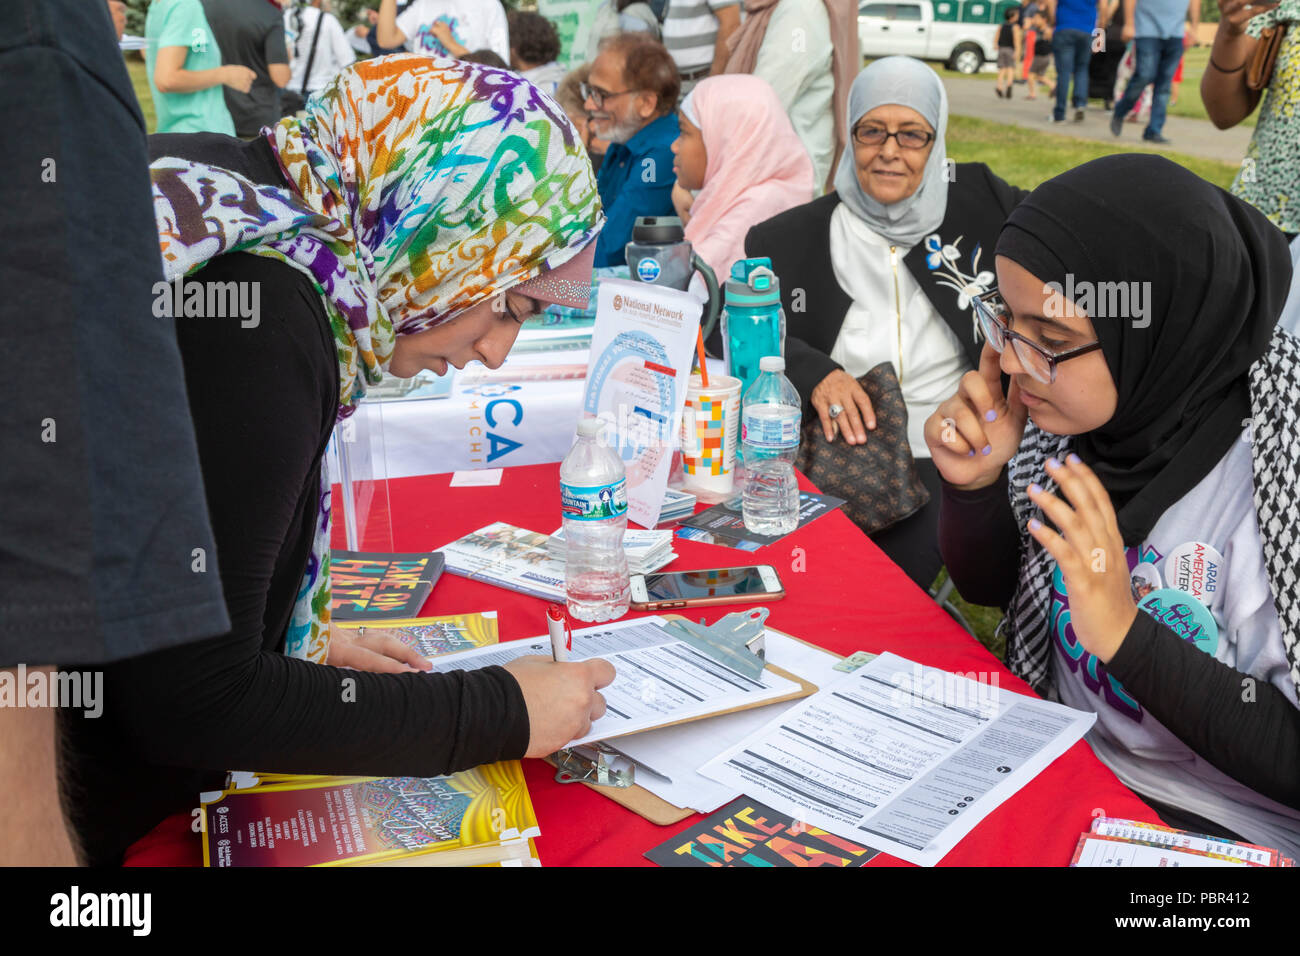 Dearborn, Michigan USA - 29 July 2018 - A woman registers to vote at a Muslim Get Out the Vote rally, sponsored by several Muslim community organizations. The rally featured entertainment and speeches from Muslim and other progressive political candidates. Credit: Jim West/Alamy Live News Stock Photo